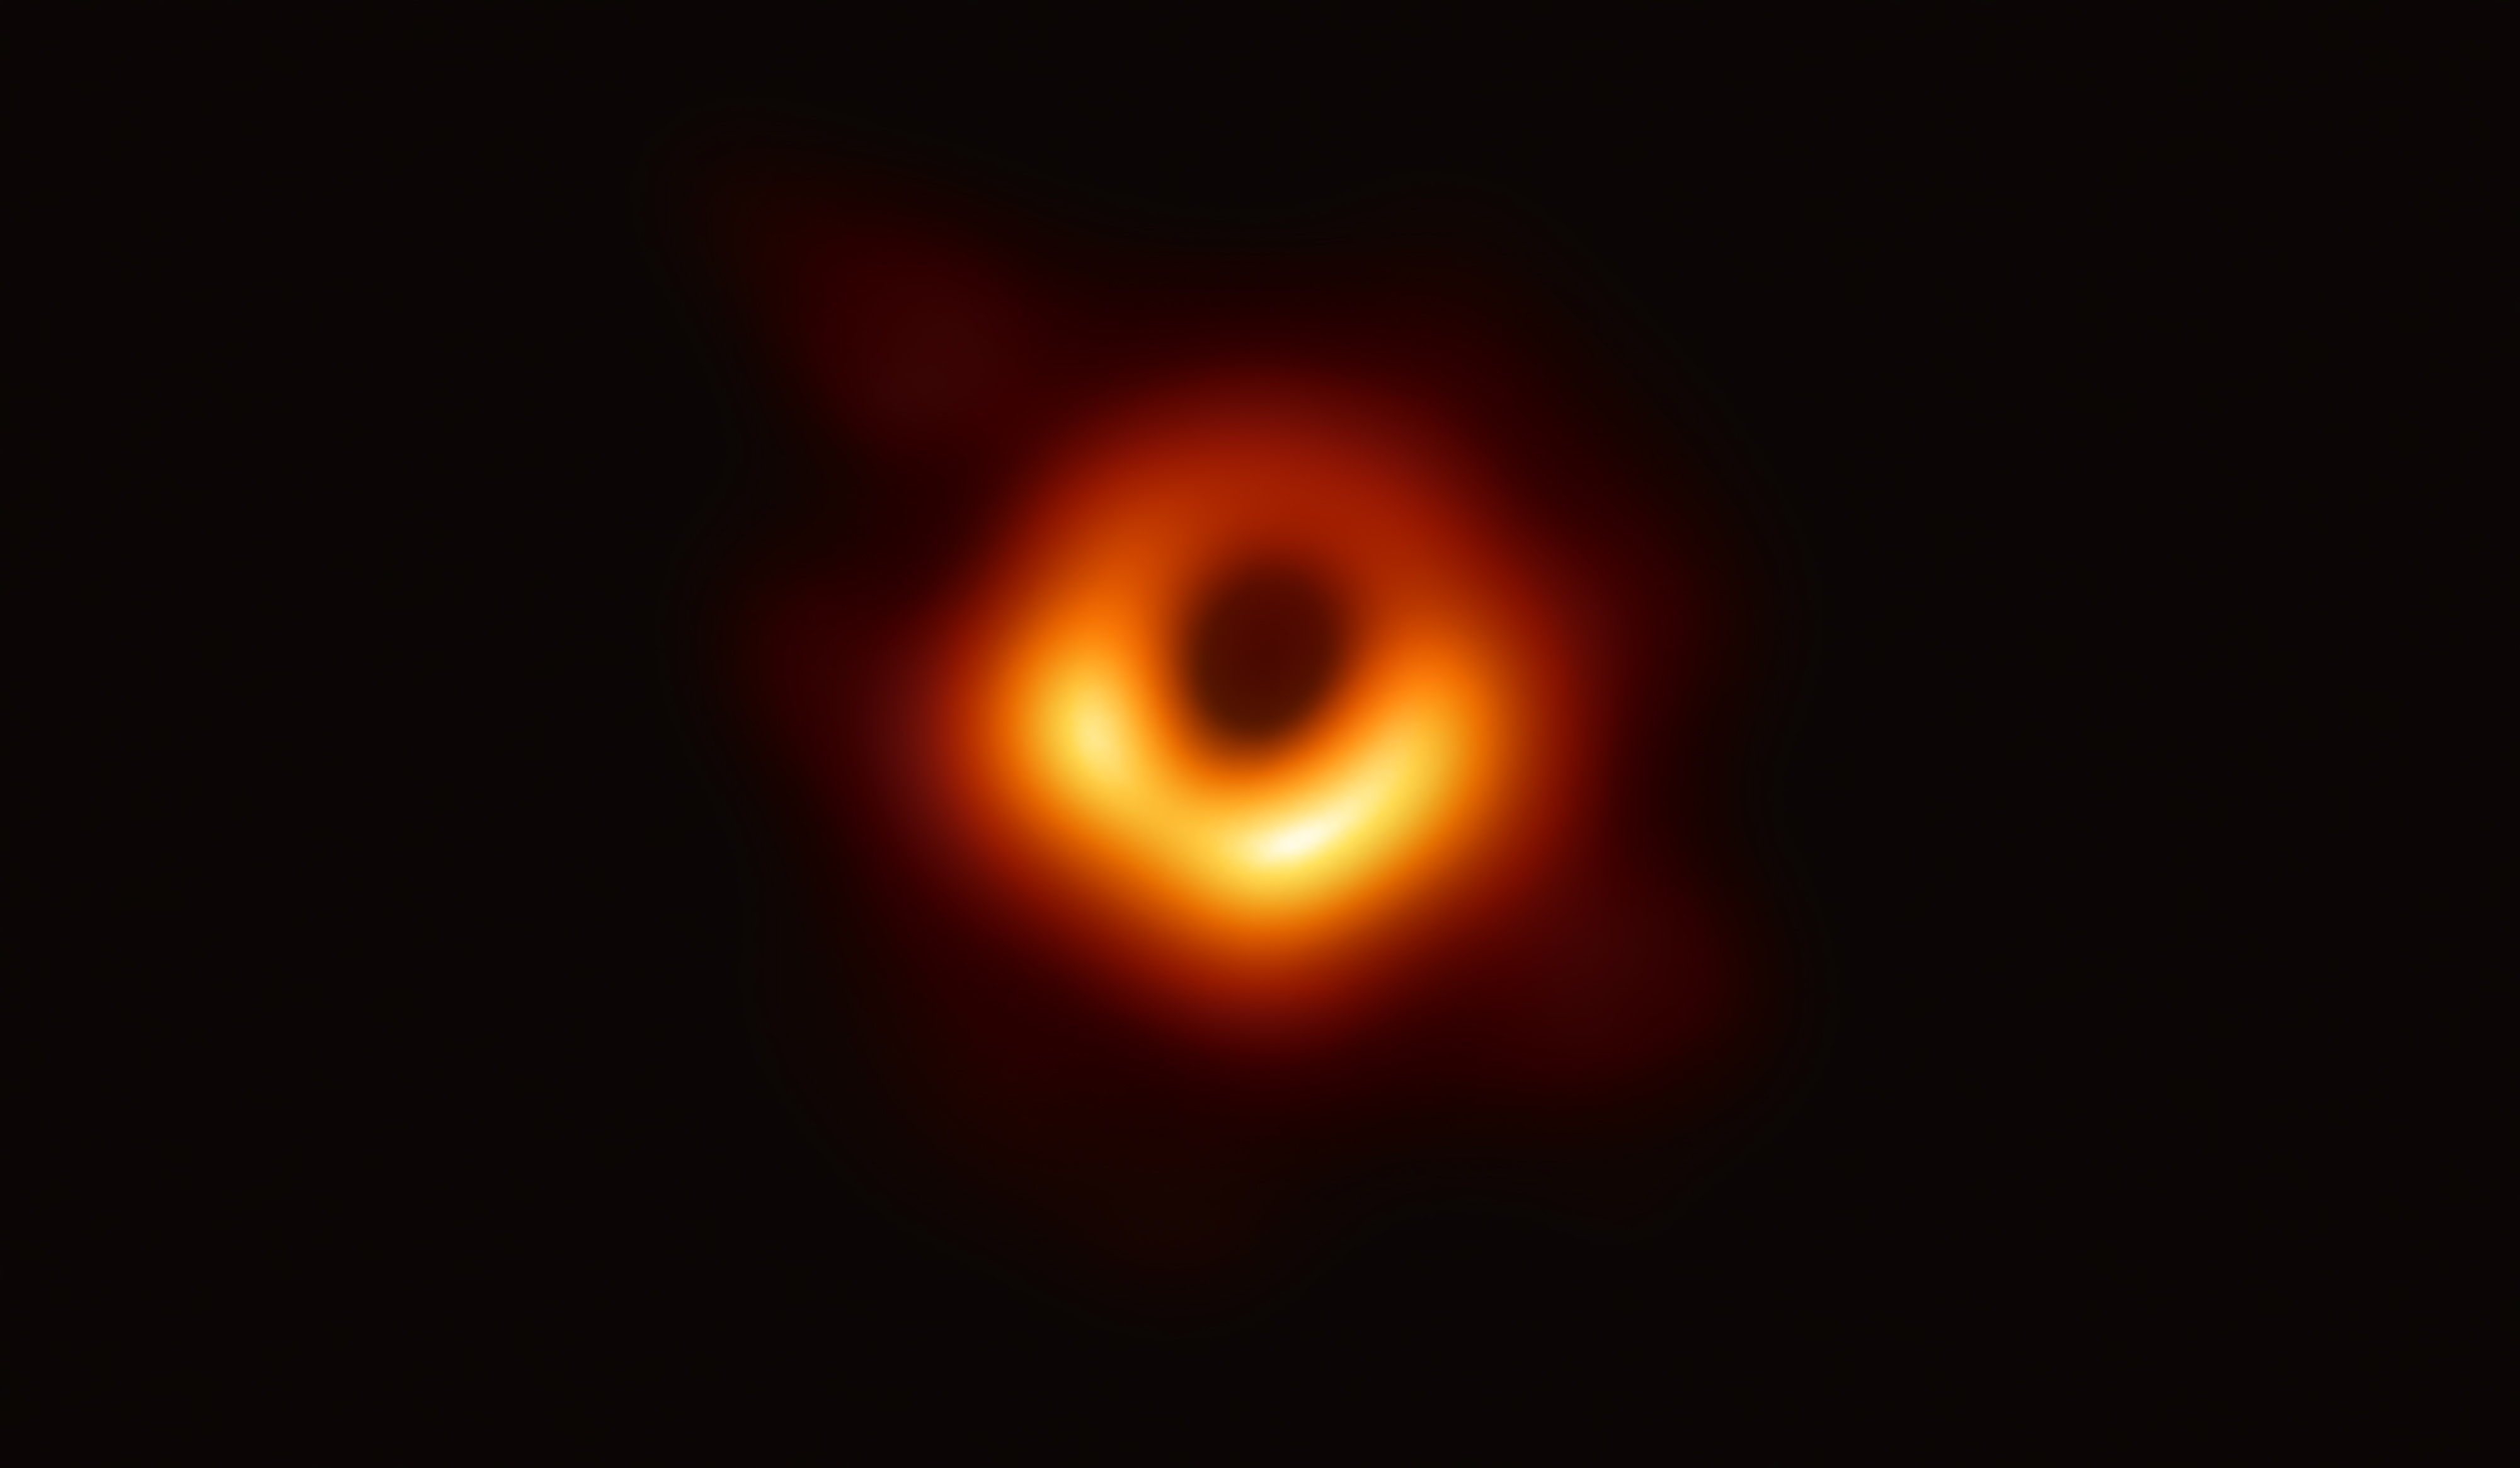 First Image of a Black Hole. NASA Solar System Exploration